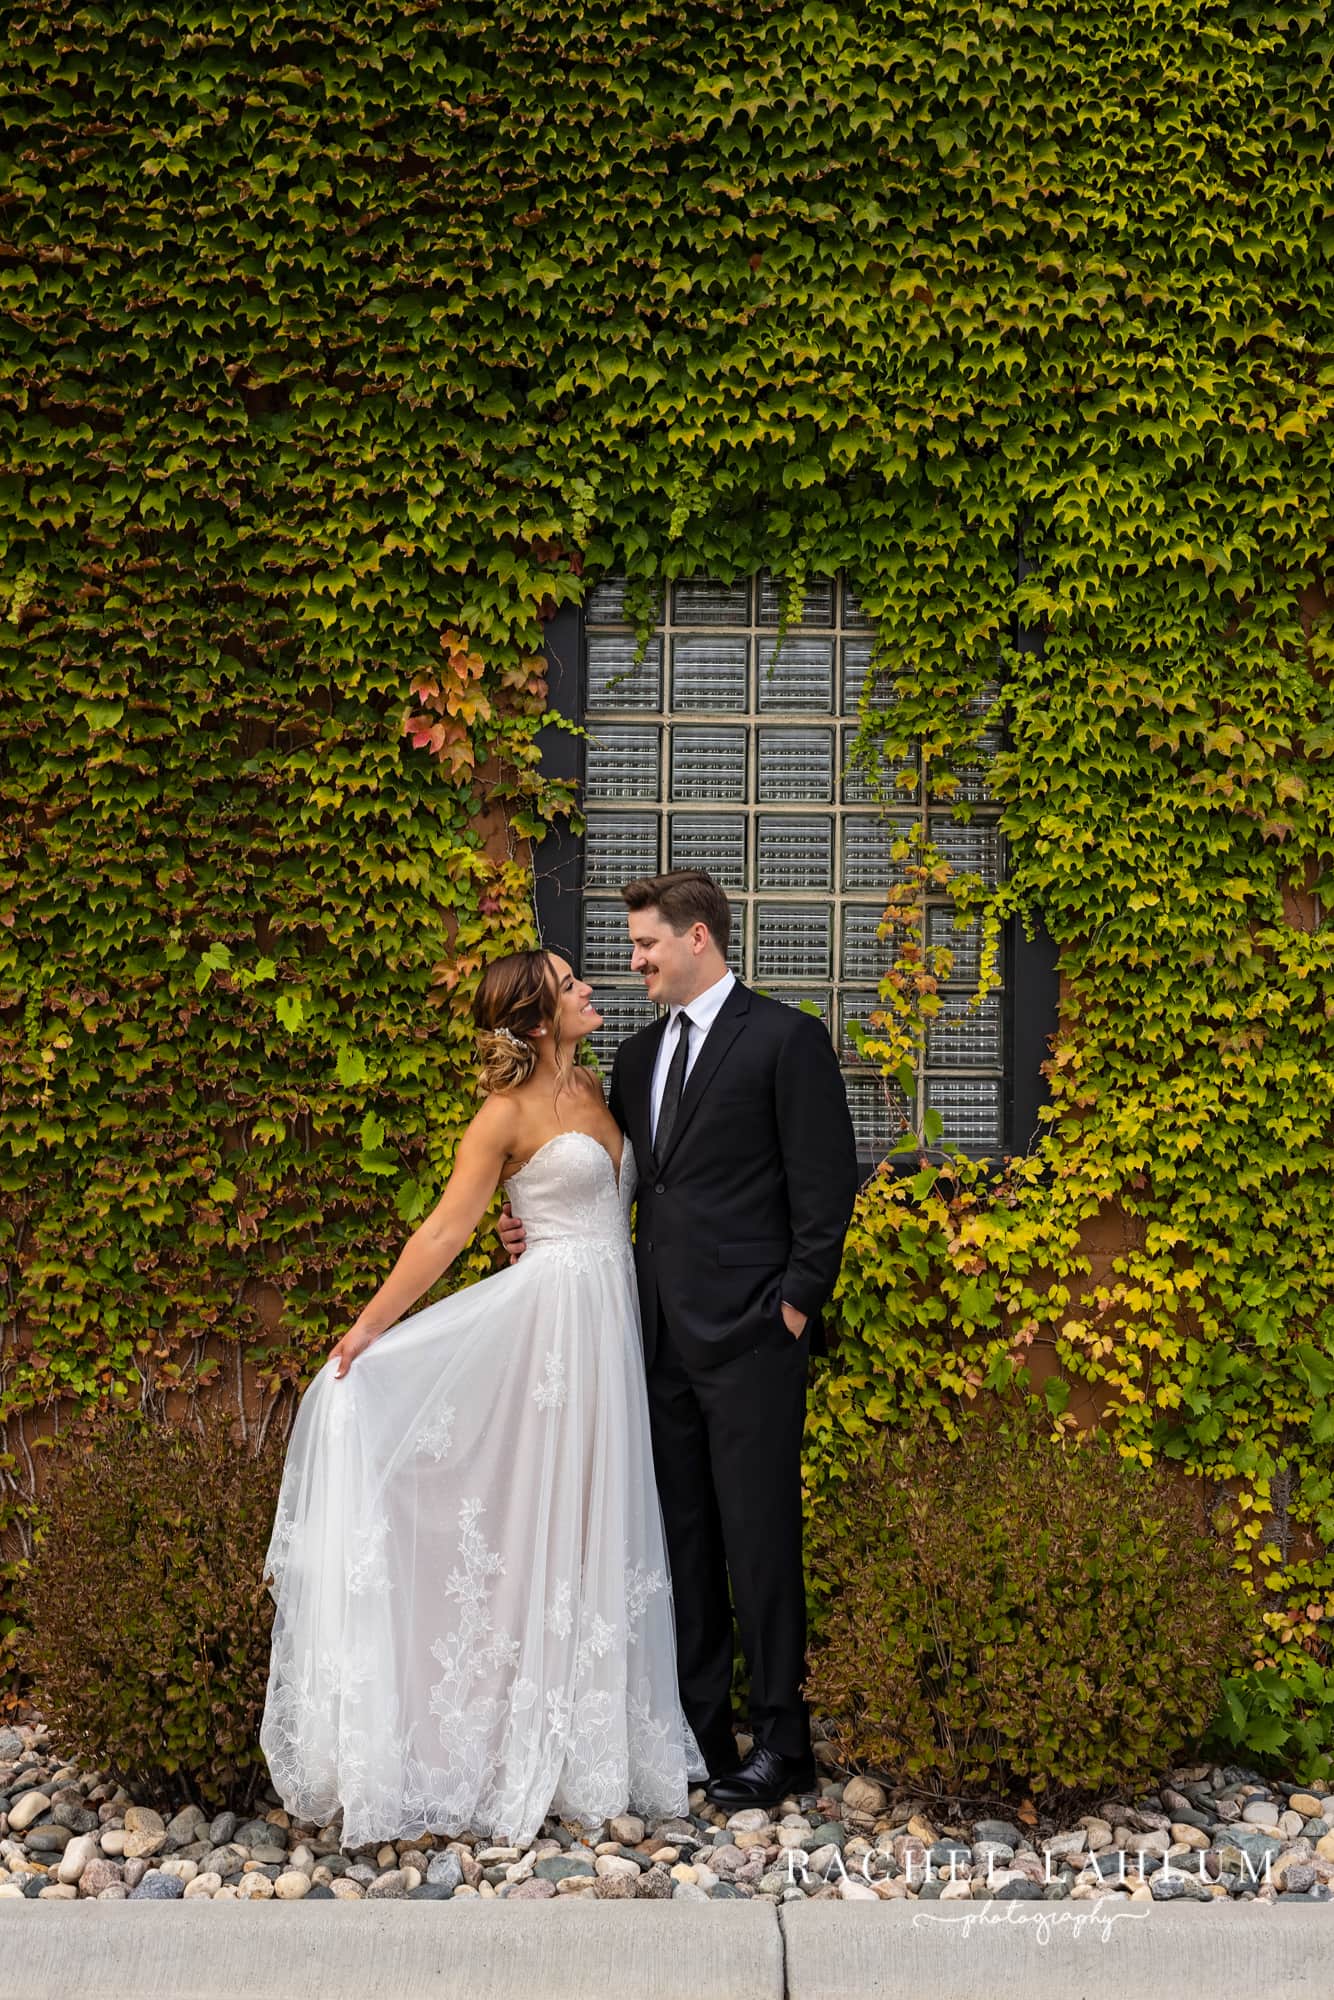 Bride and groom smile at each other during wedding photography, while standing in front of a wall covered in ivy at the Boathouse in Alexandria, Minnesota.